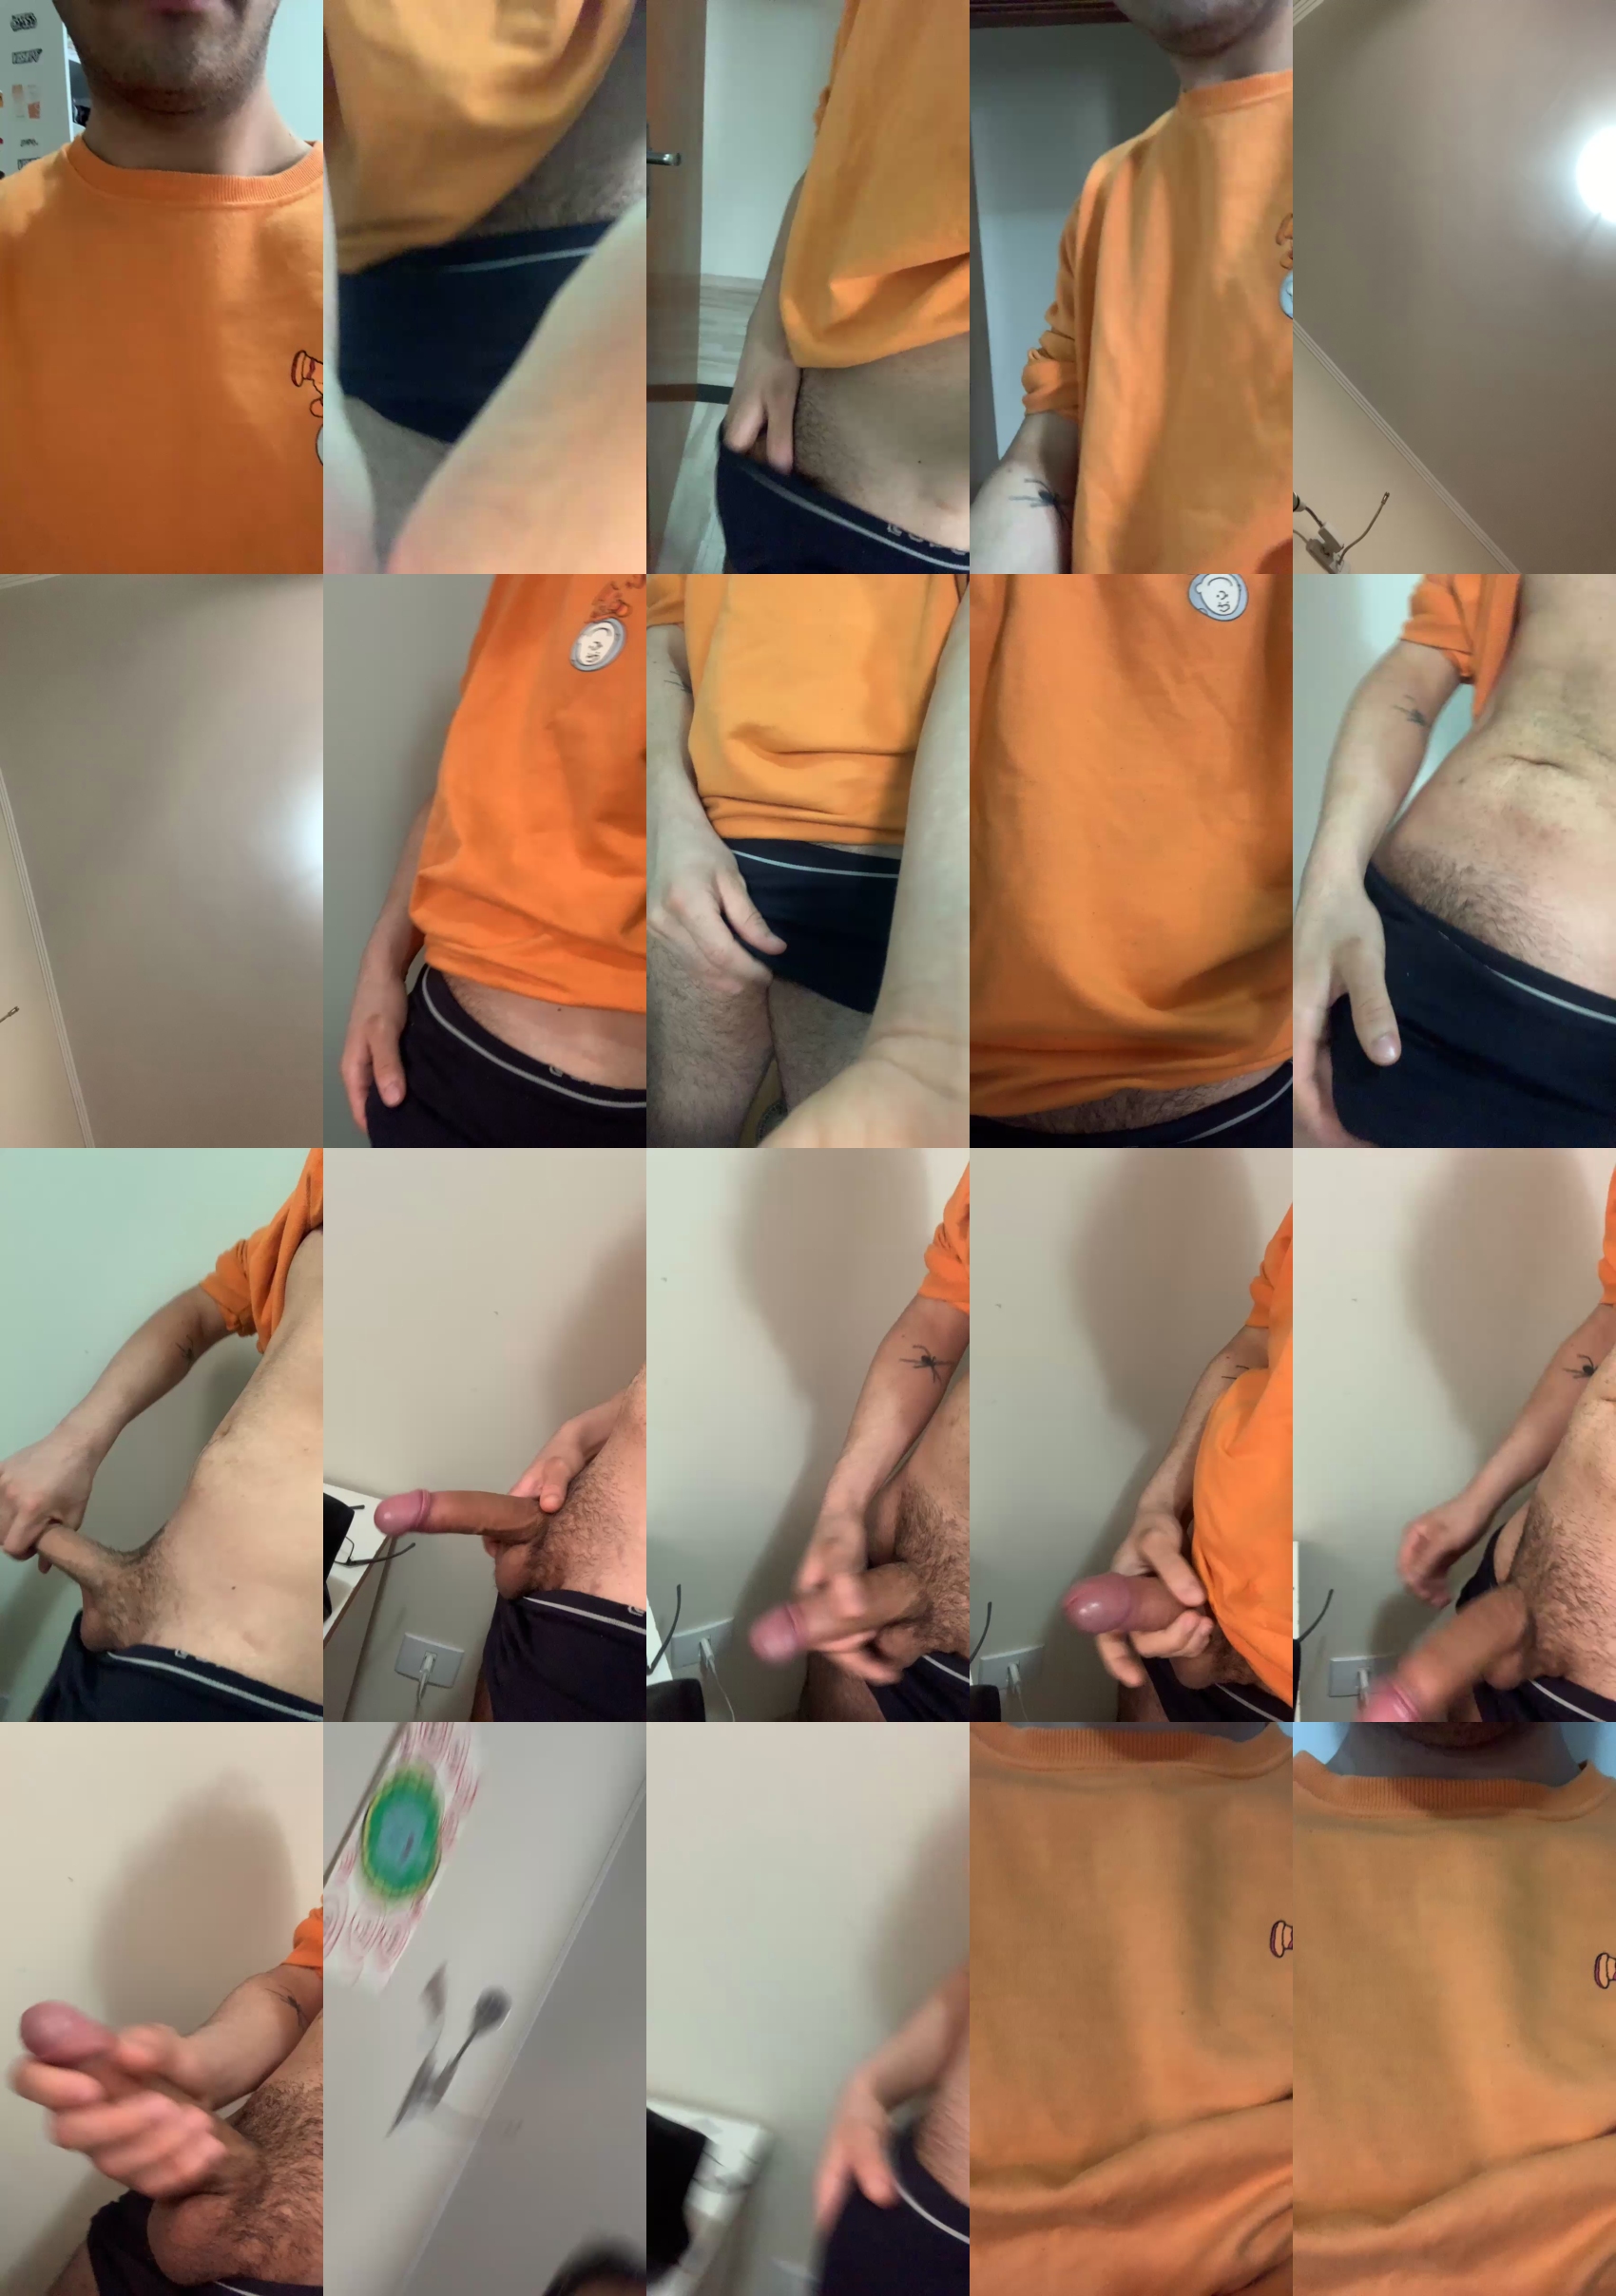 hung_twink20cm  26-07-2023 Recorded Video ass